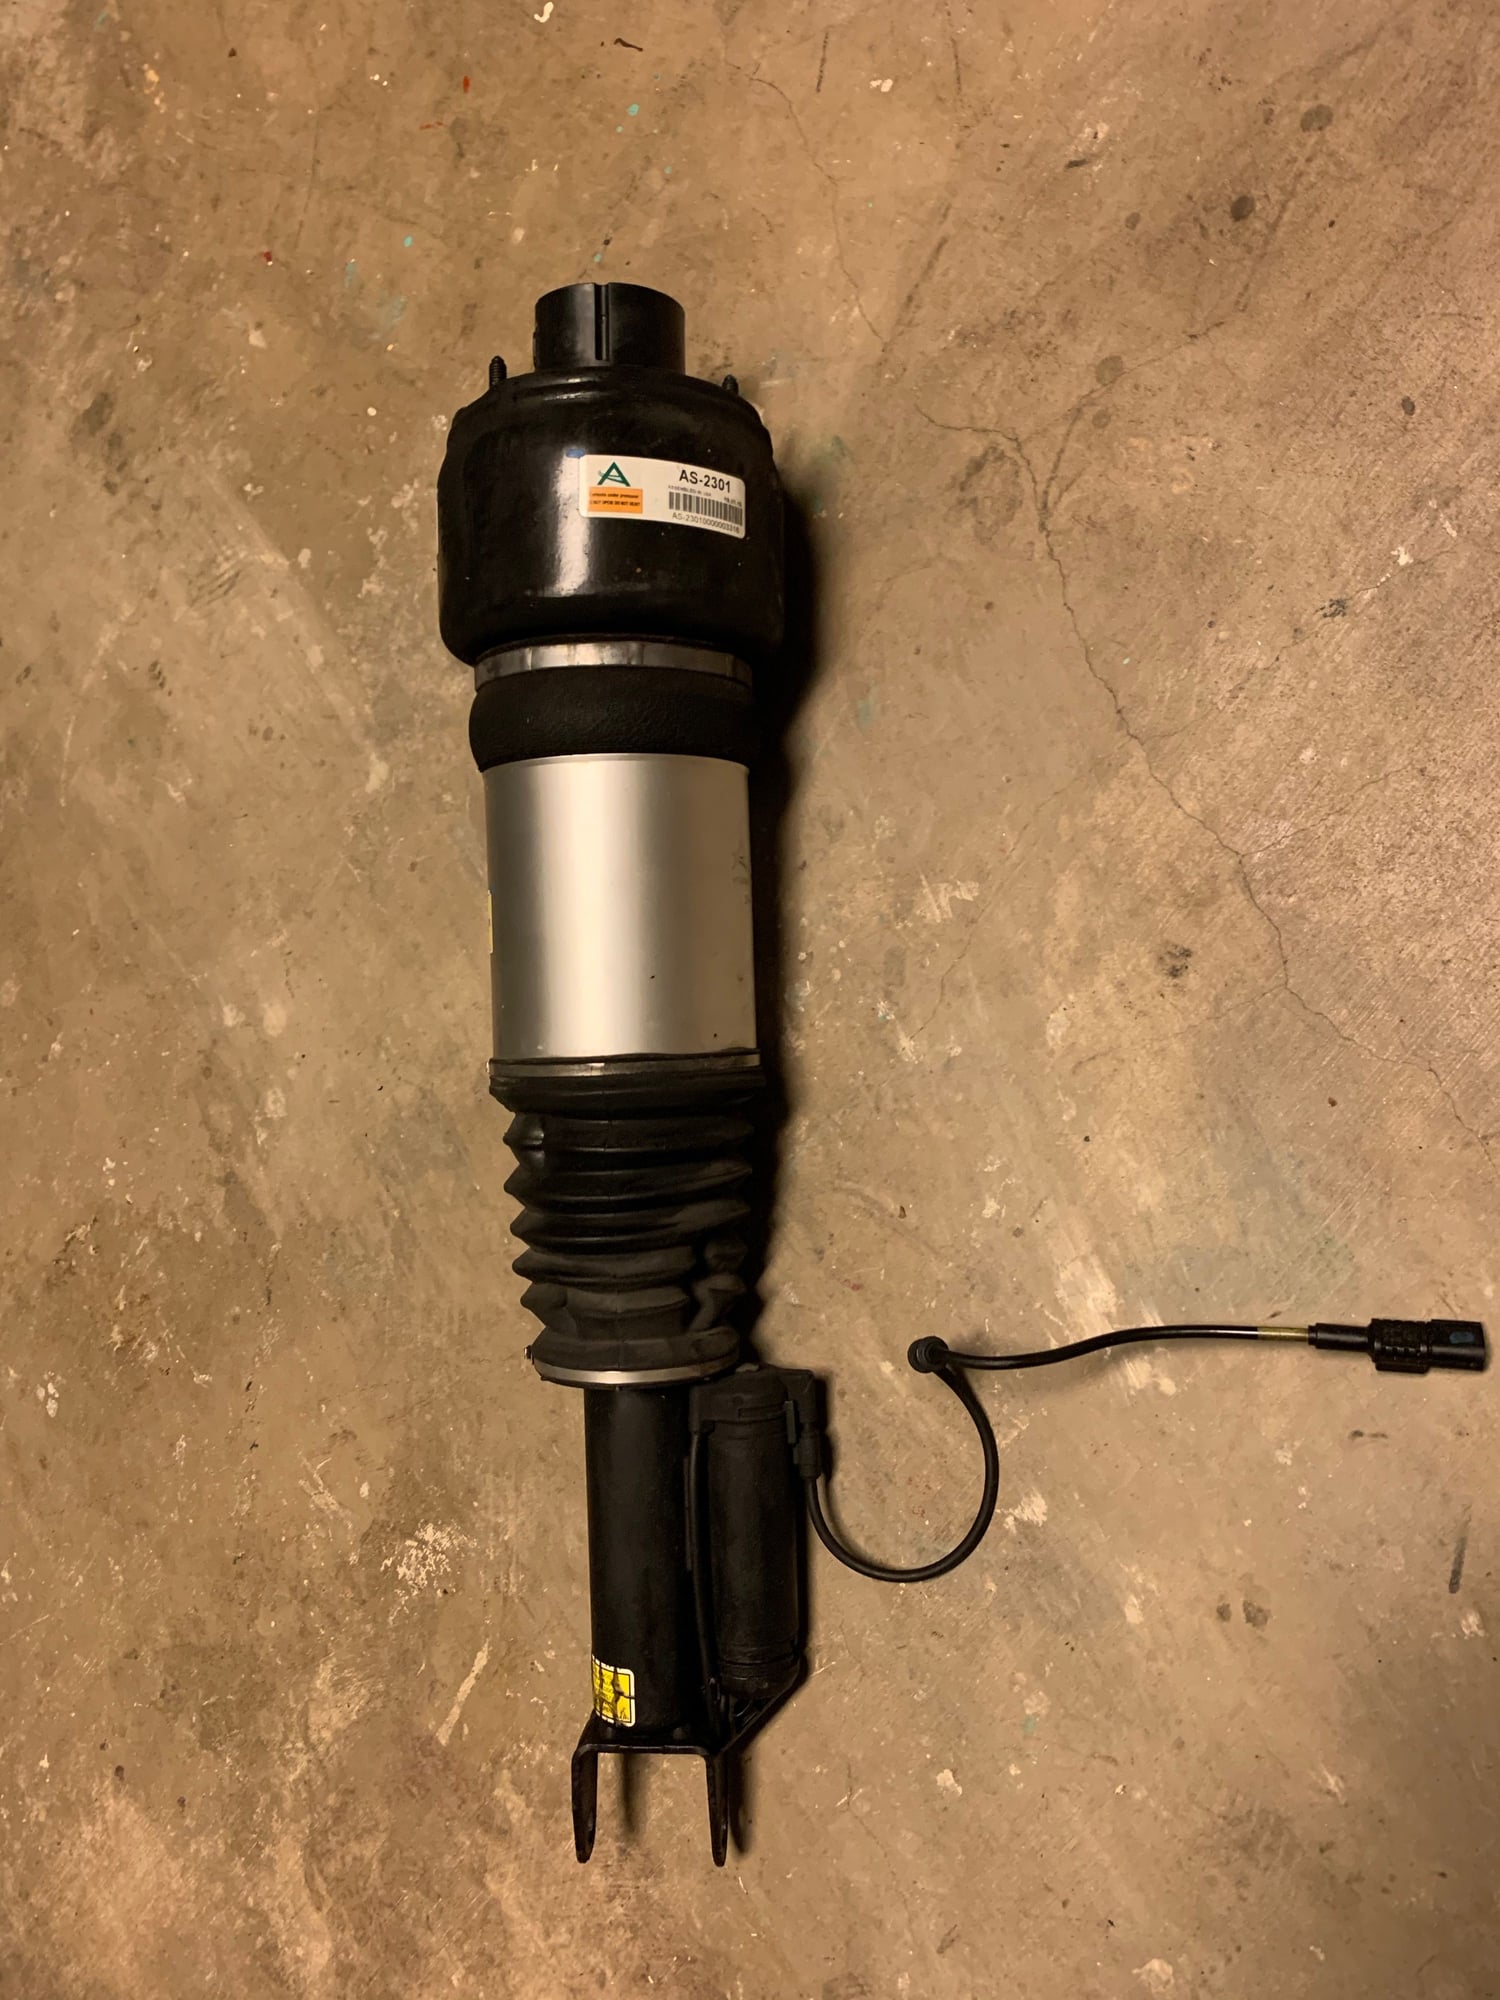 Steering/Suspension - Arnott AS-2301 W211 E55 AMG Front Left Air Suspension Strut - Used - 2003 to 2006 Mercedes-Benz E55 AMG - Austin, TX 78729, United States